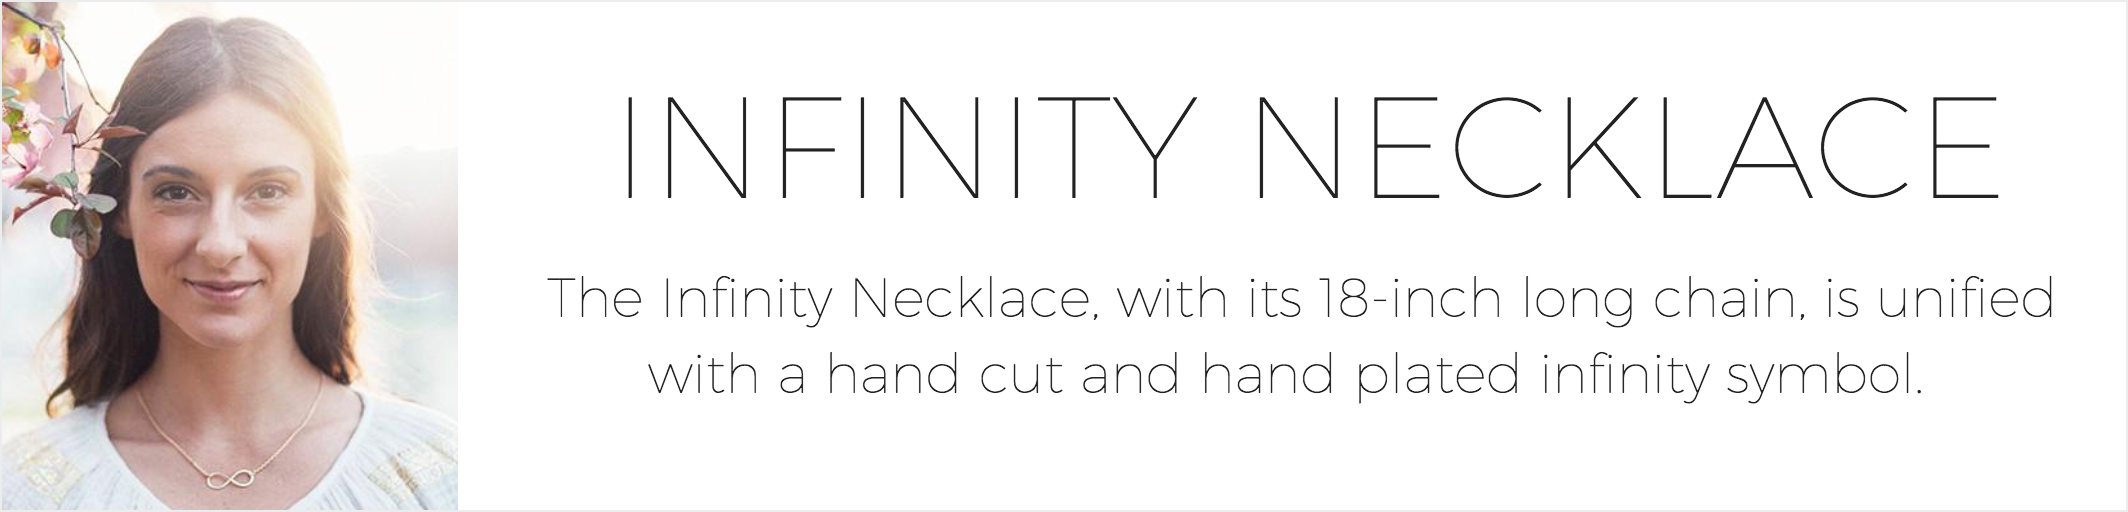 Infinity Necklace Ad